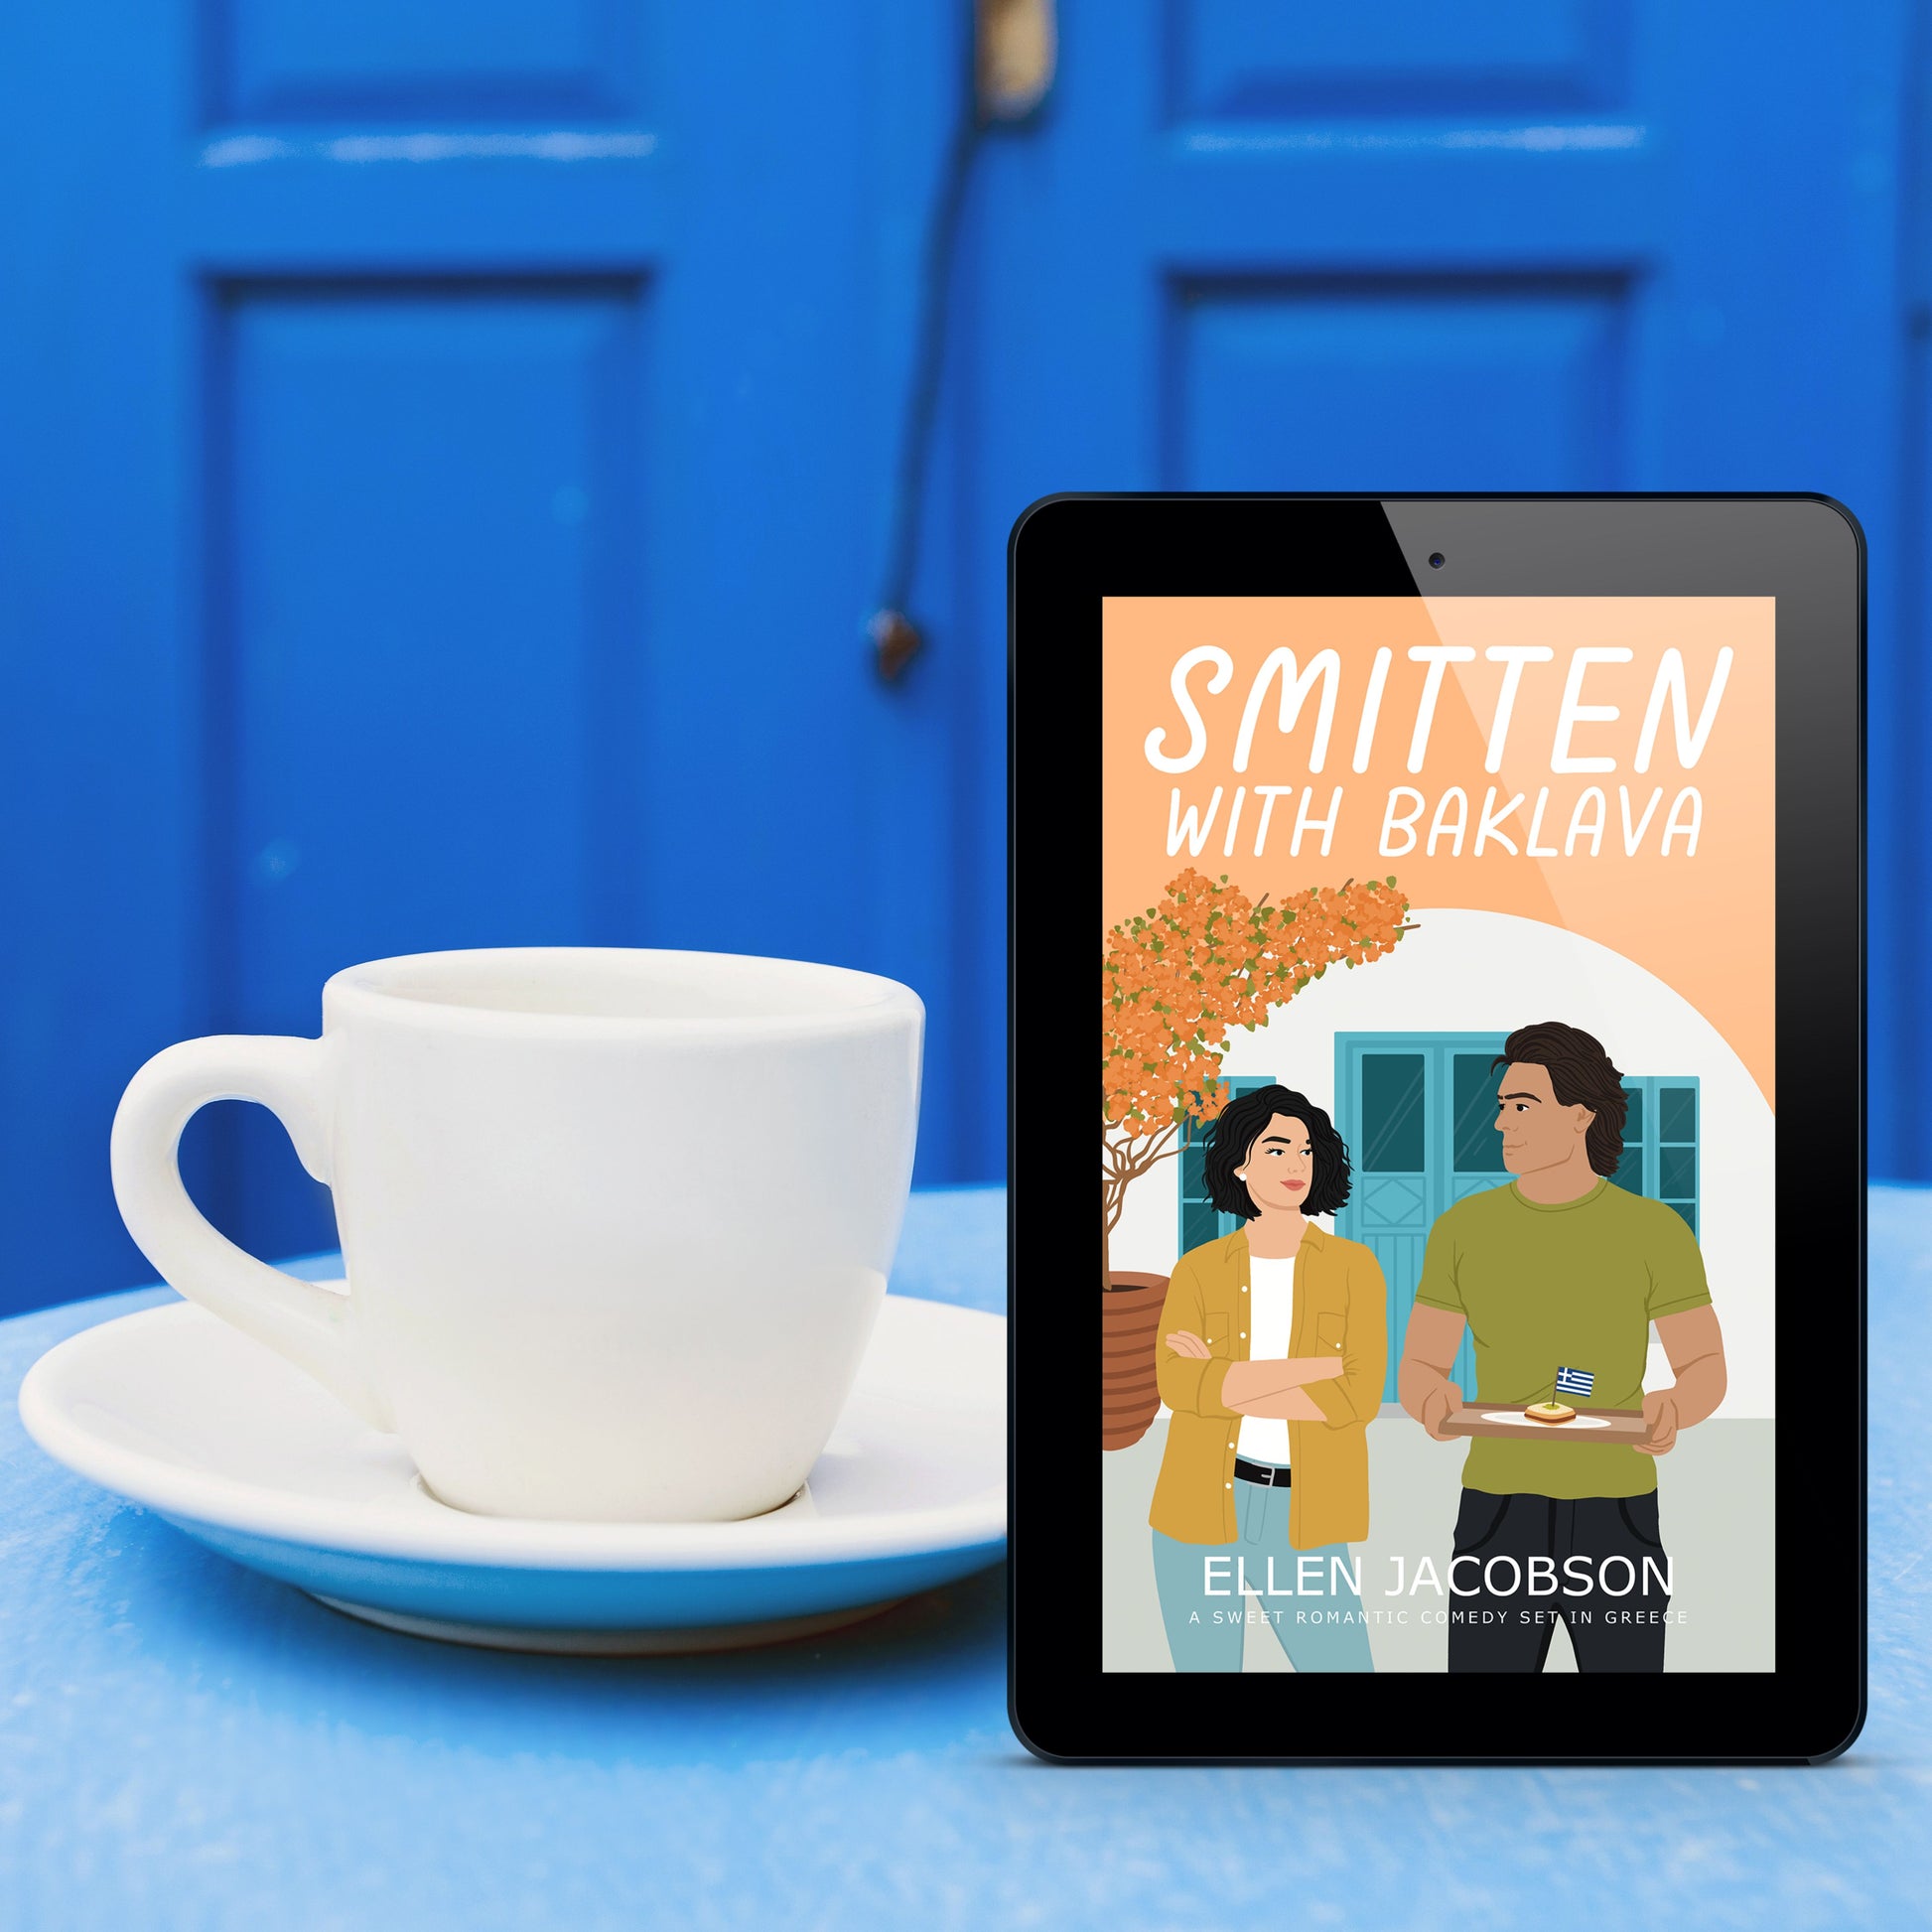 Smitten with Baklava ebook cover next to  white coffee cup and blue door